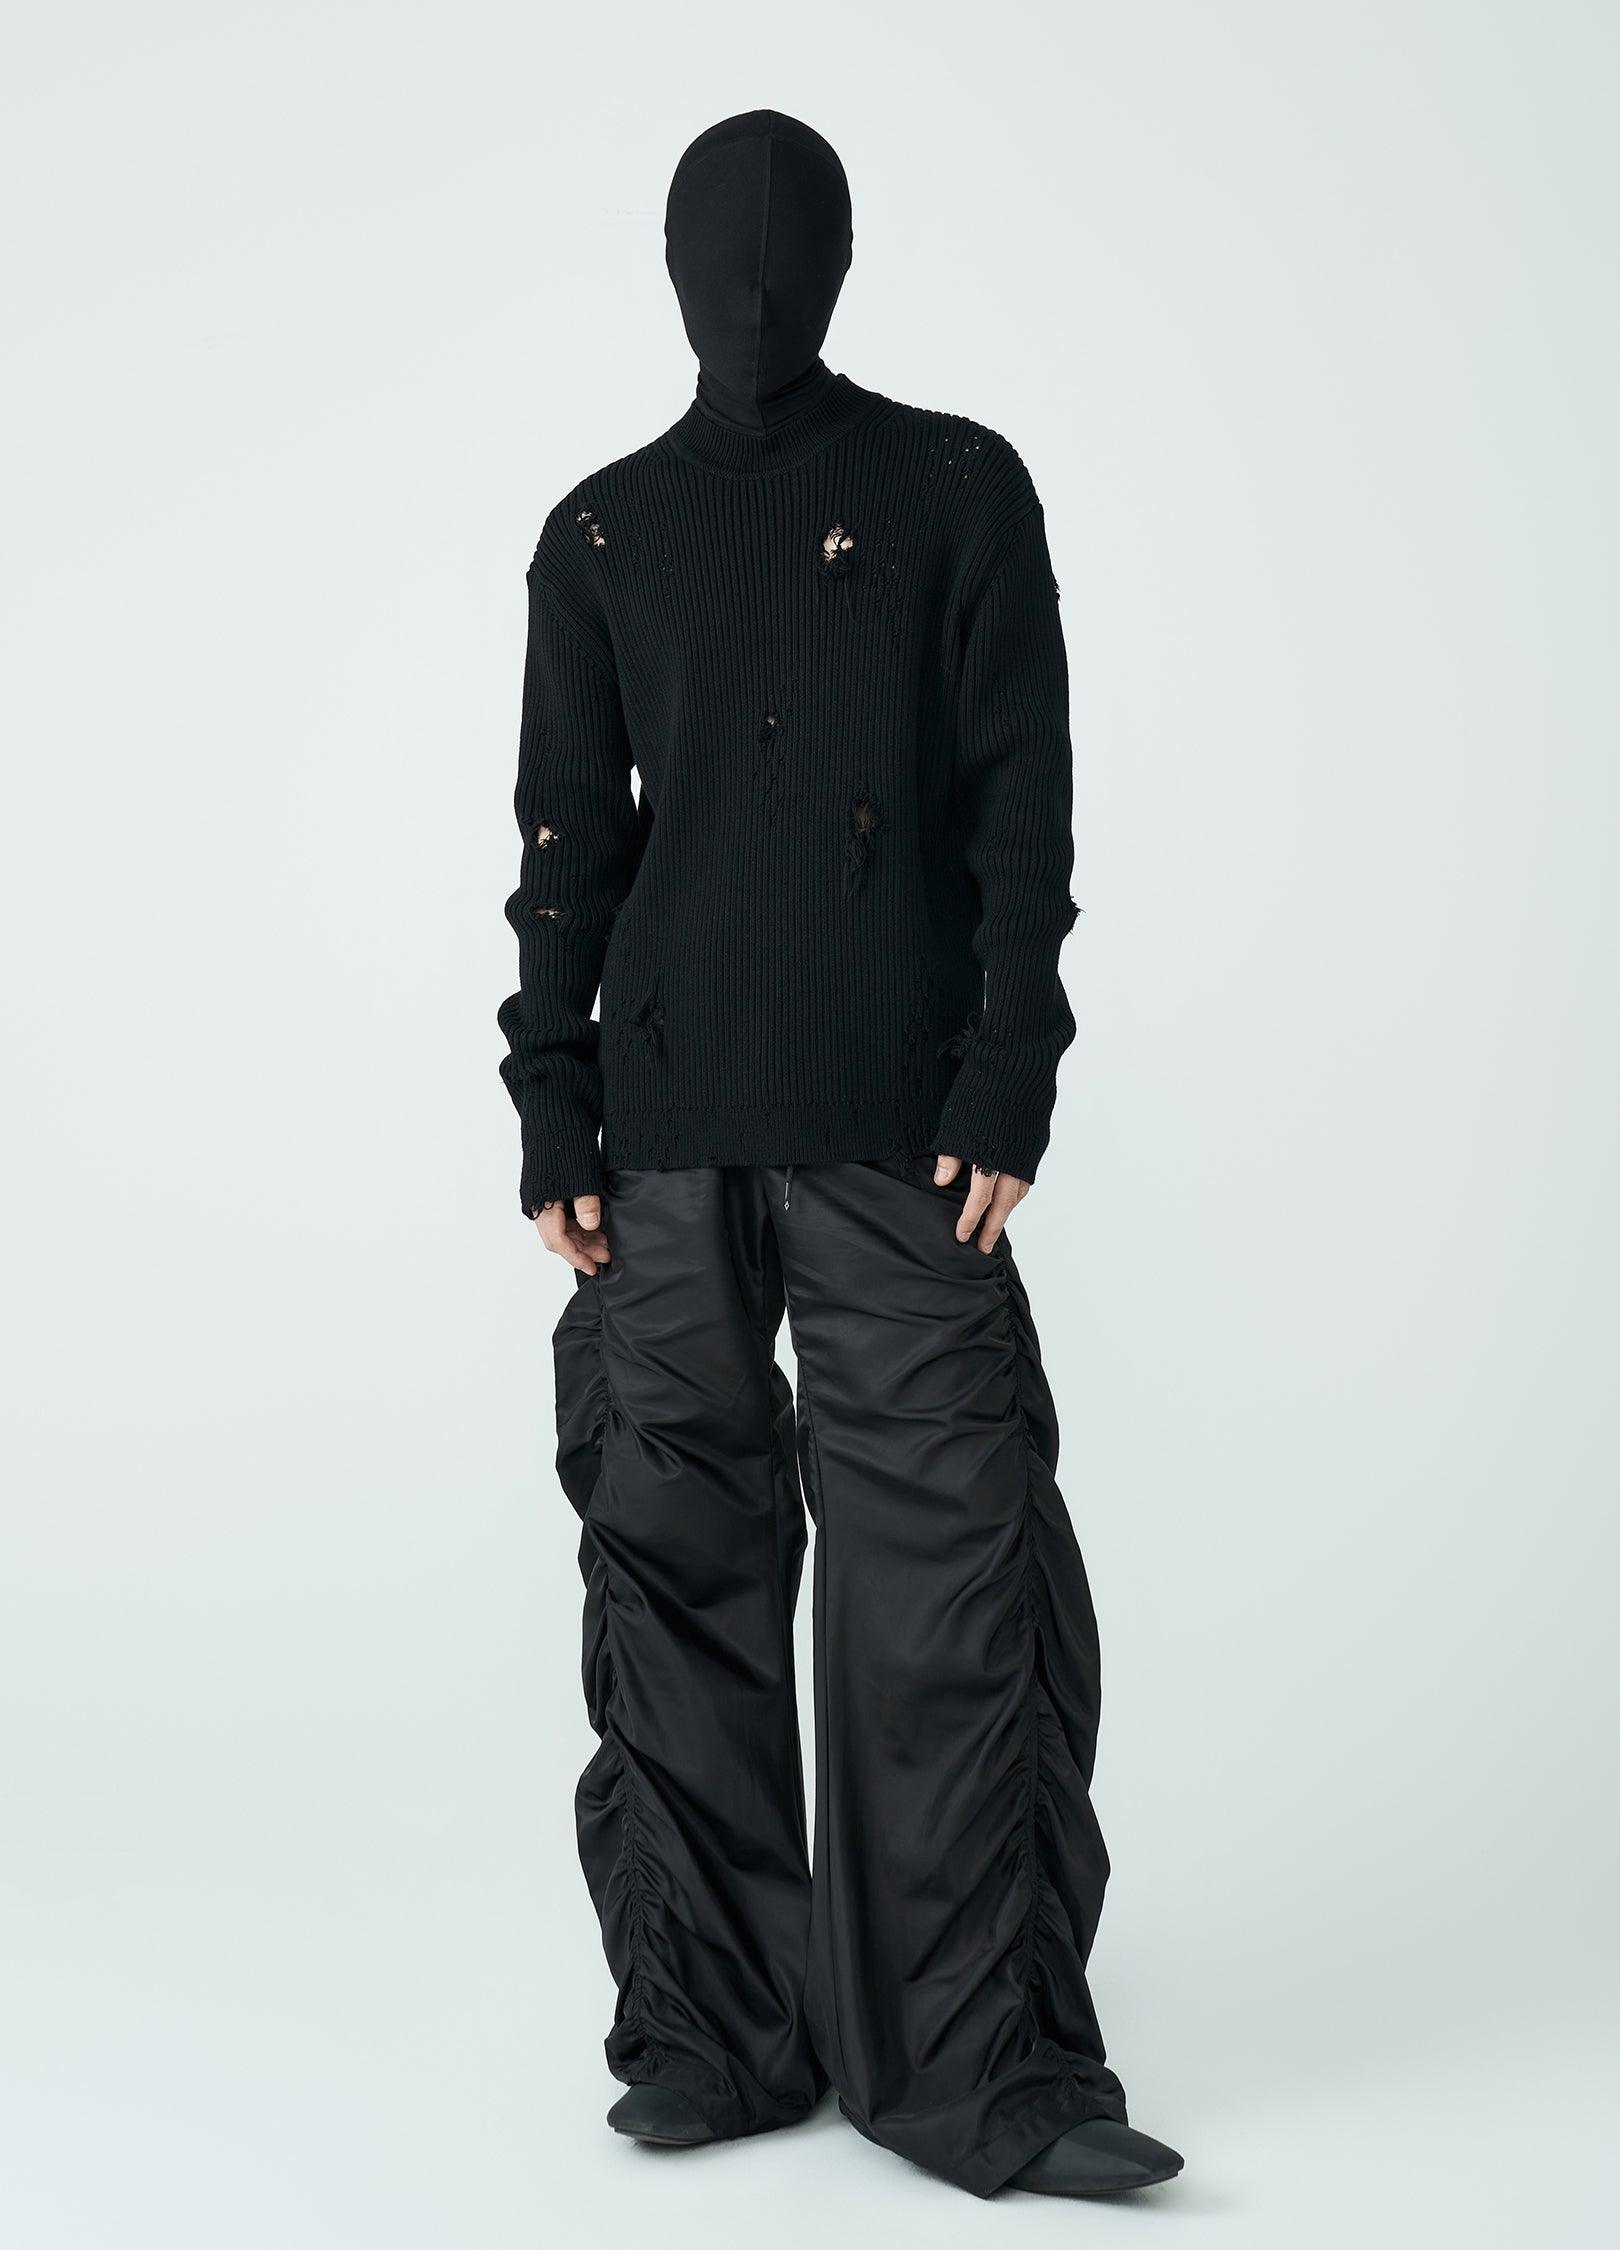 Parachute Wave Trousers by FRKM SCDF - chiclara